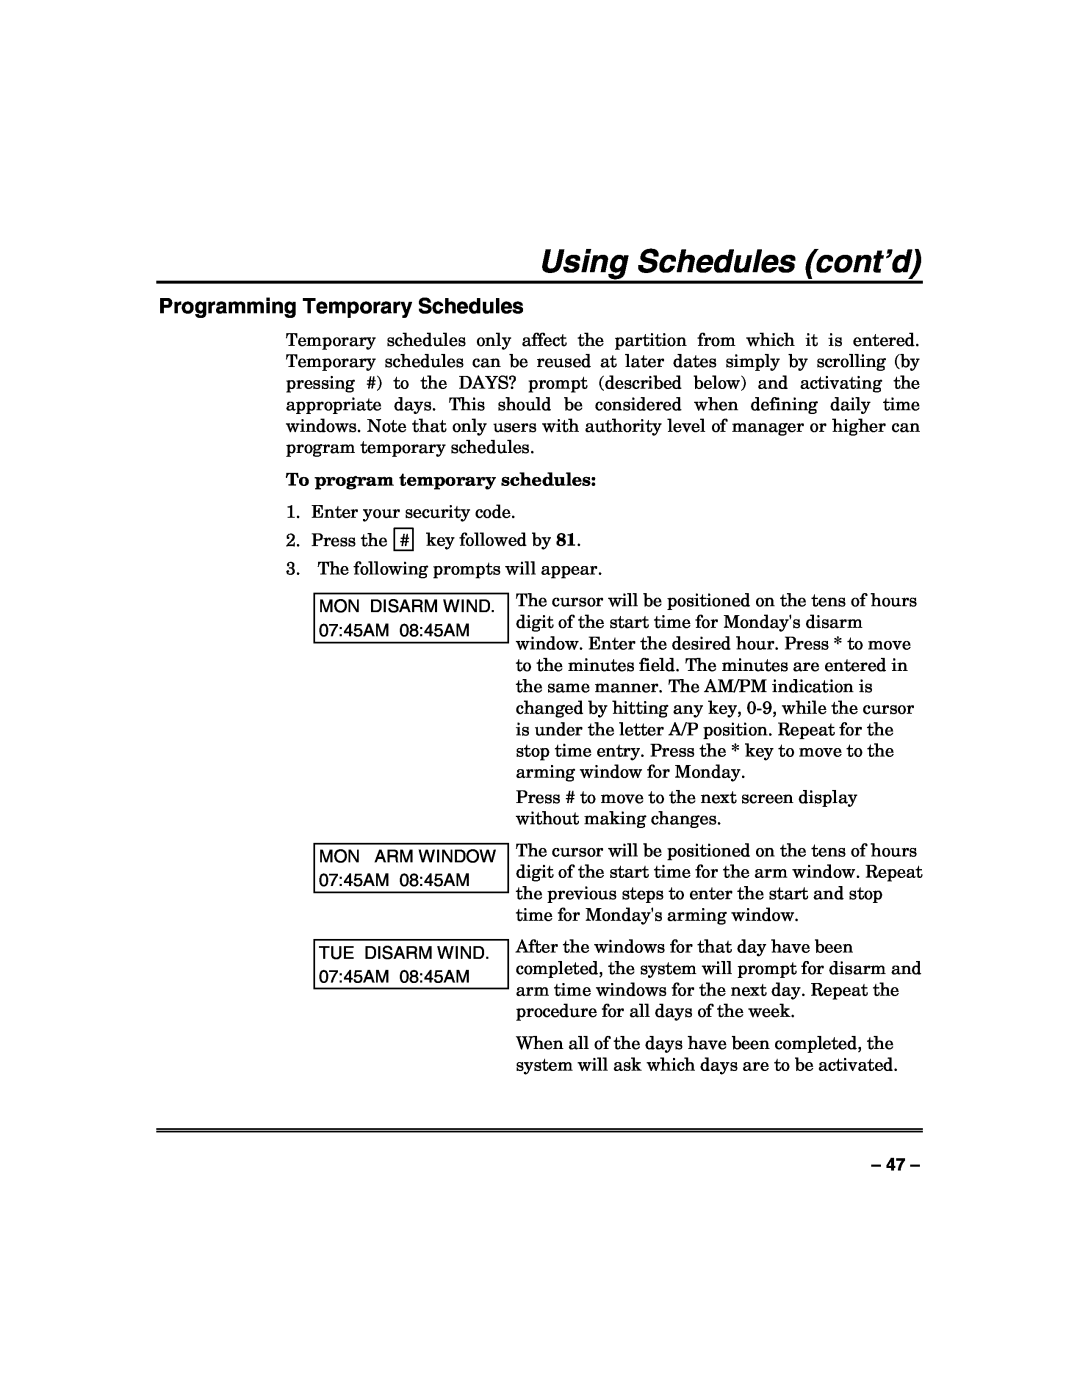 Honeywell VISTA-128FBP manual Using Schedules cont’d, Programming Temporary Schedules, To program temporary schedules 